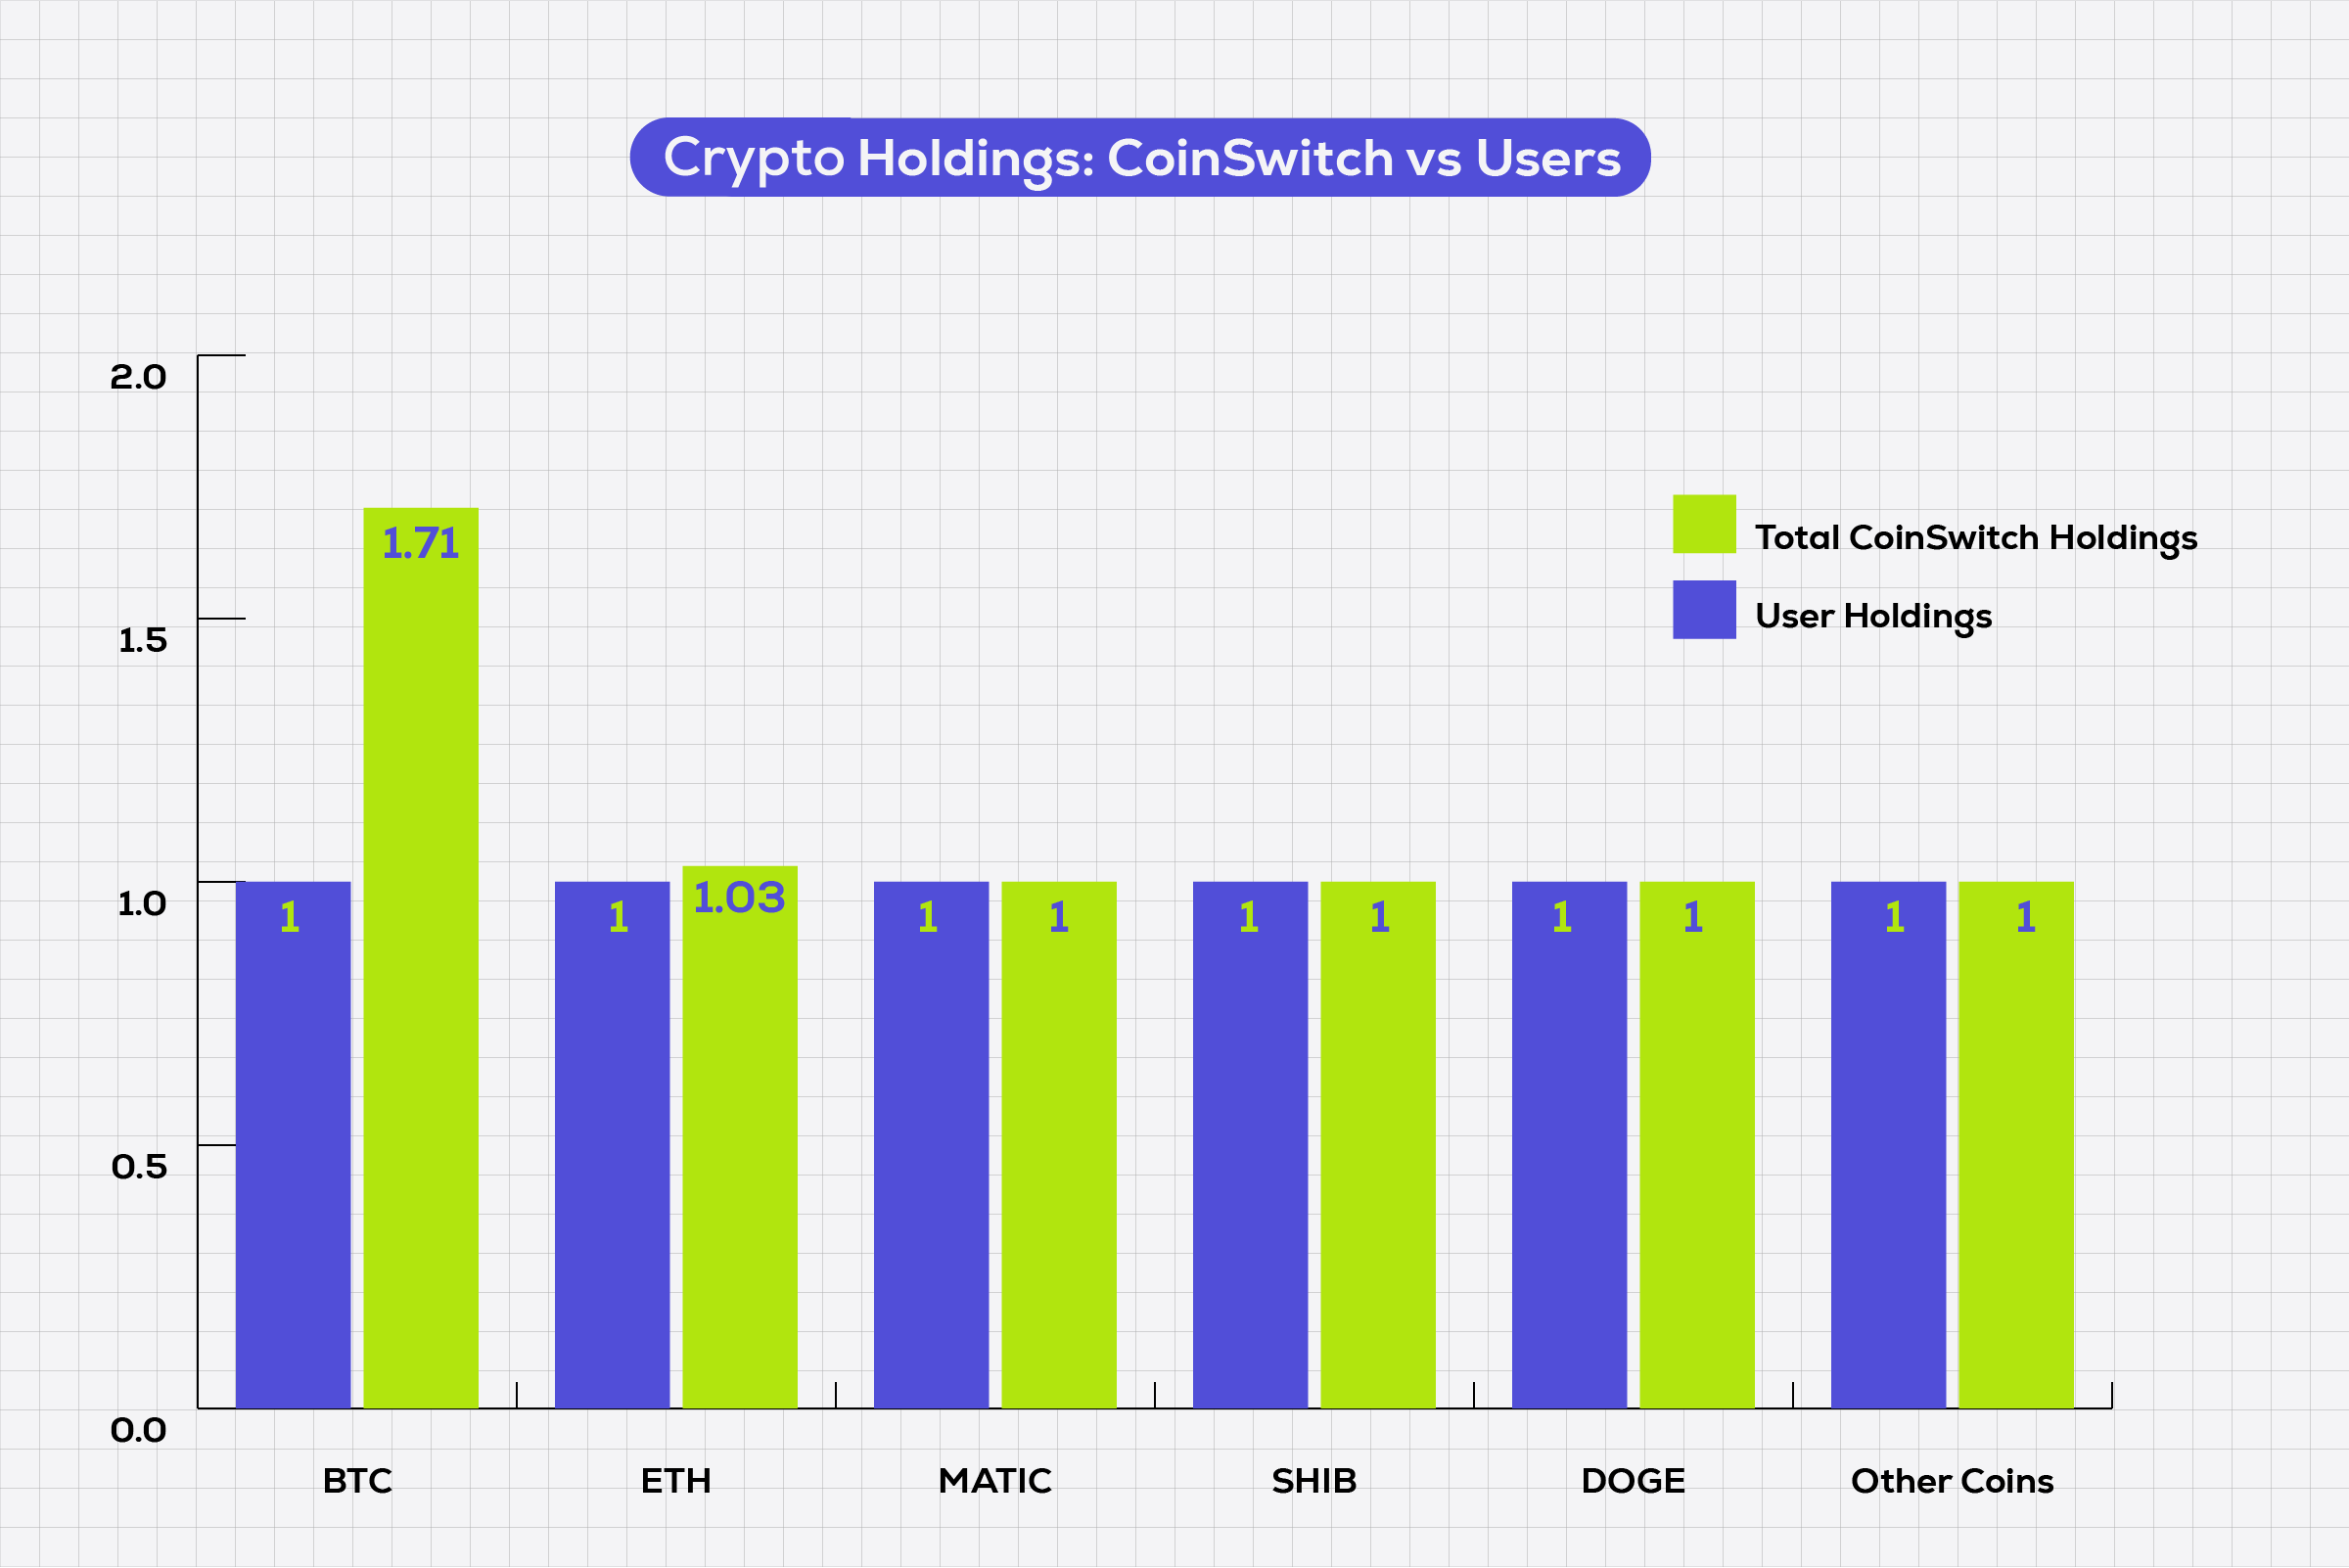 Crypto Holdings: CoinSwitch vs Users